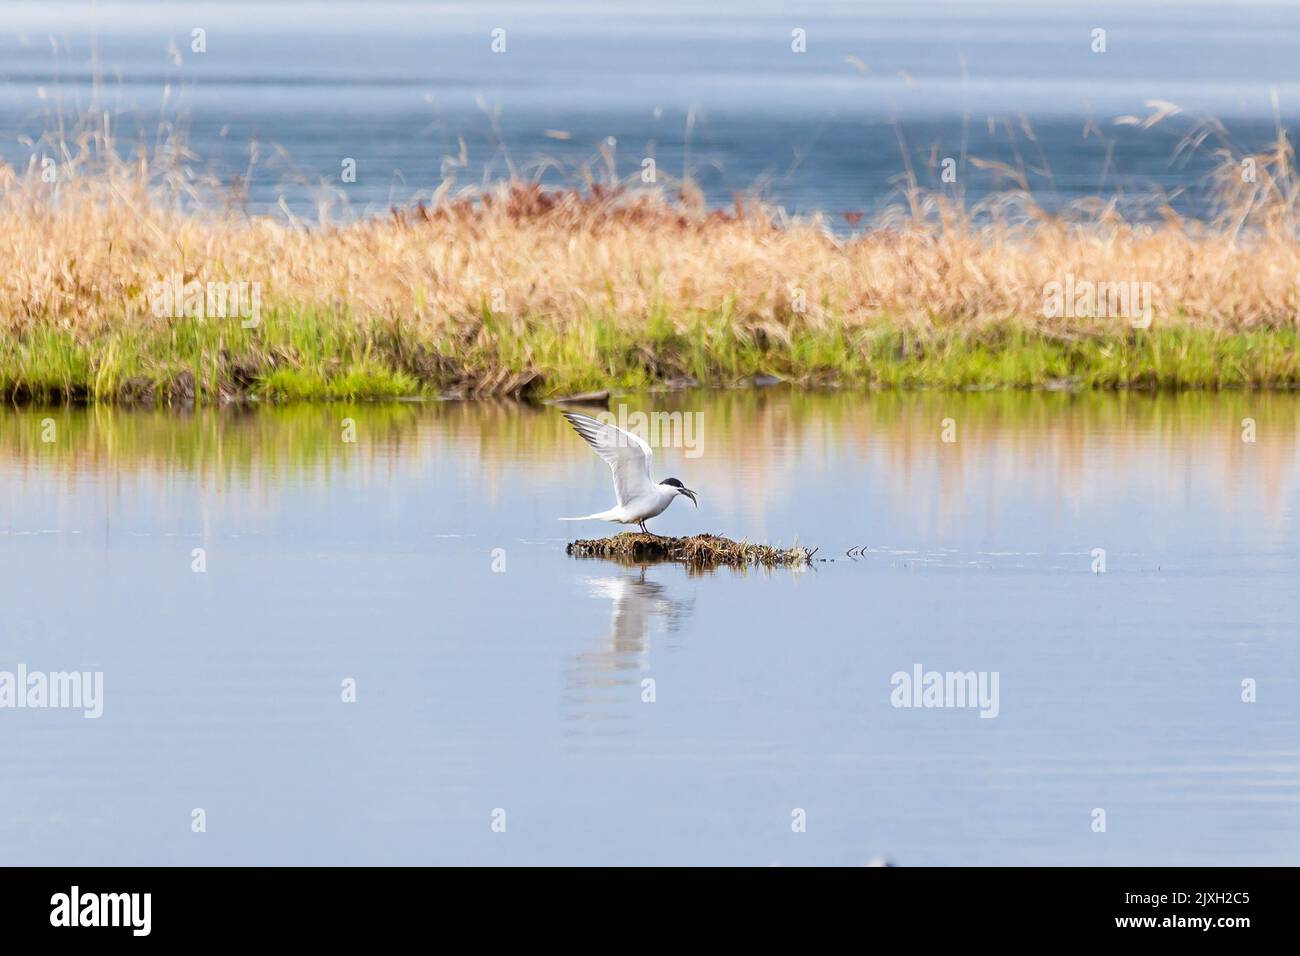 A seagull swallows a caught fish, sitting on a small island in the lake. Stock Photo